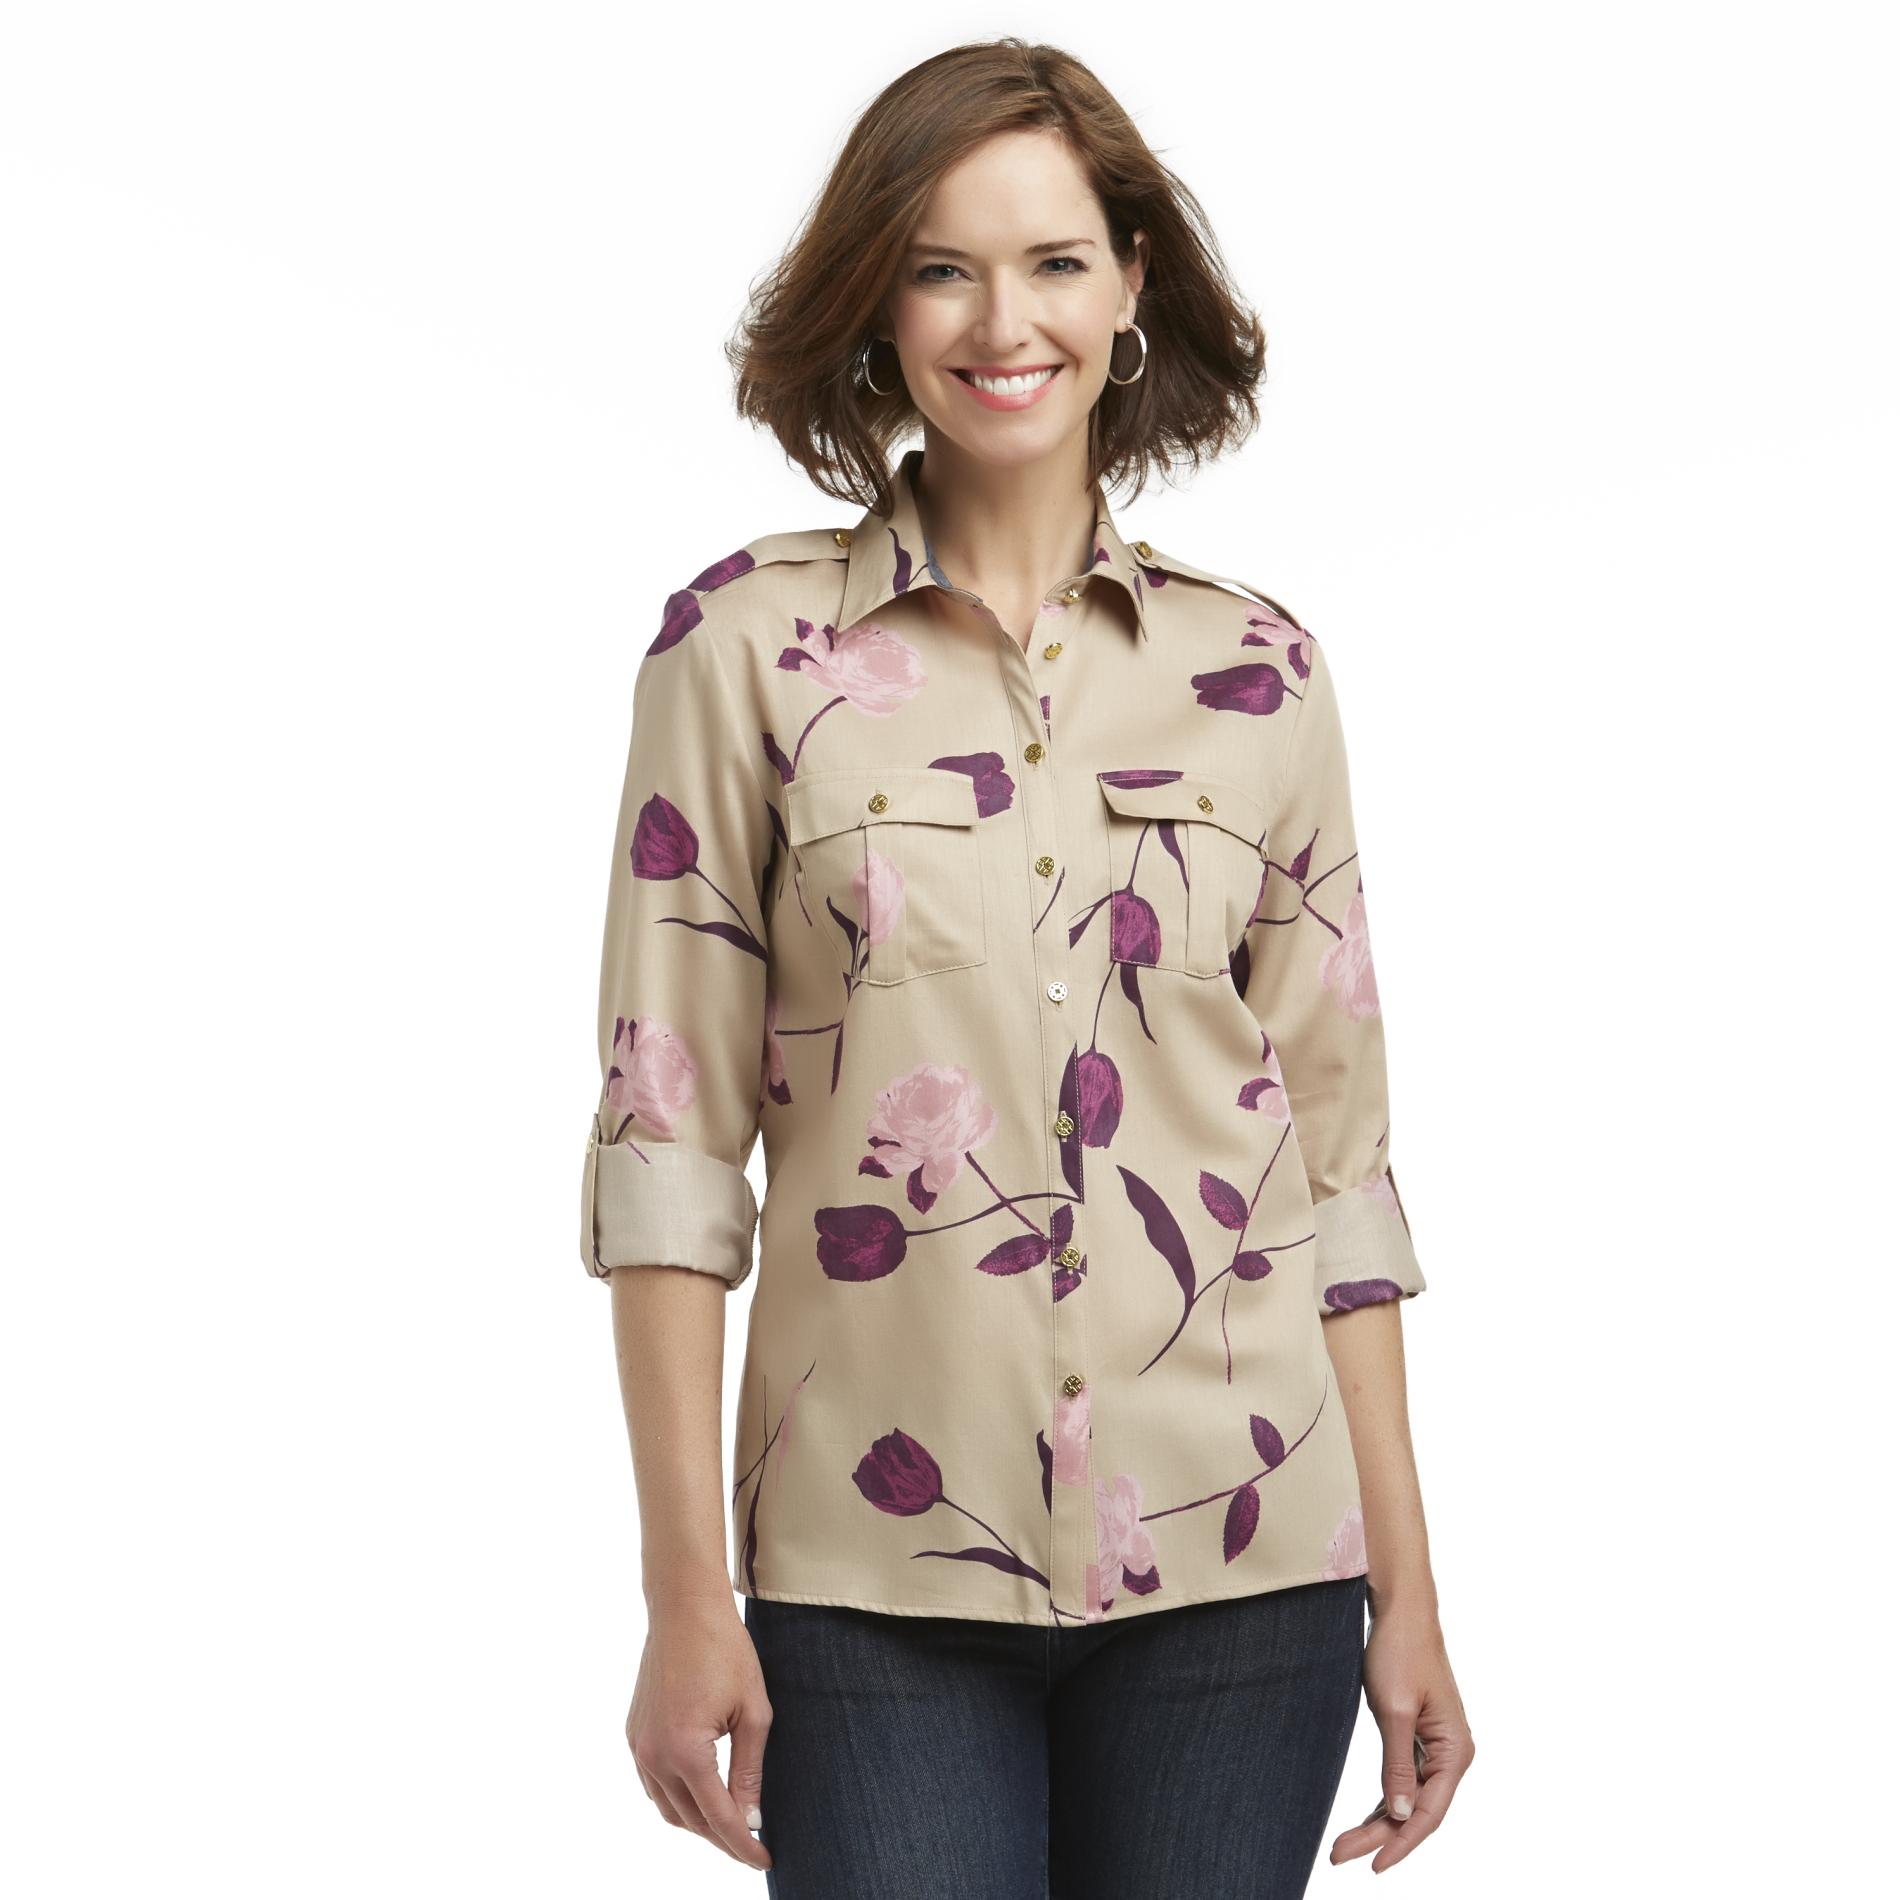 Jaclyn Smith Women's Utility Shirt - Floral